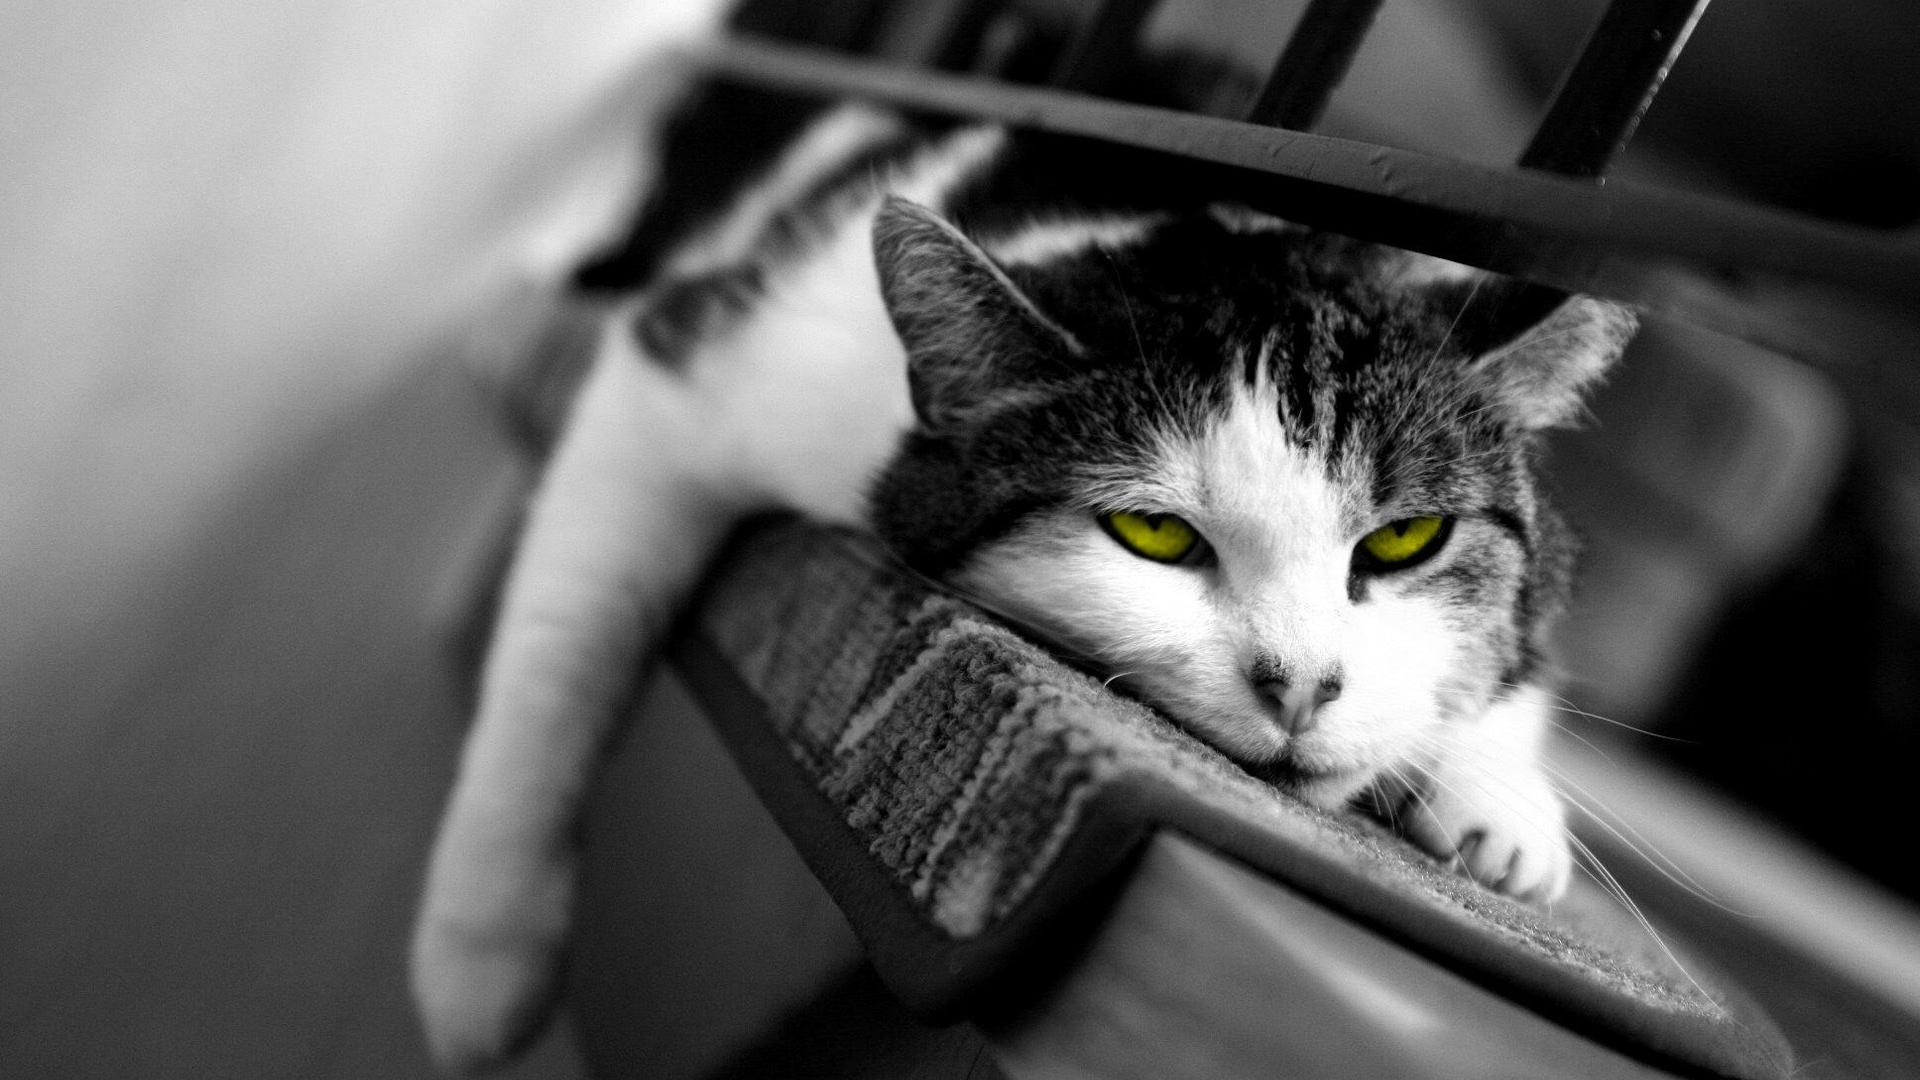 Wallpaper, animals, selective coloring, nose, whiskers, skin, eye, kitten, darkness, black and white, monochrome photography, close up, cat like mammal, small to medium sized cats 1920x1080